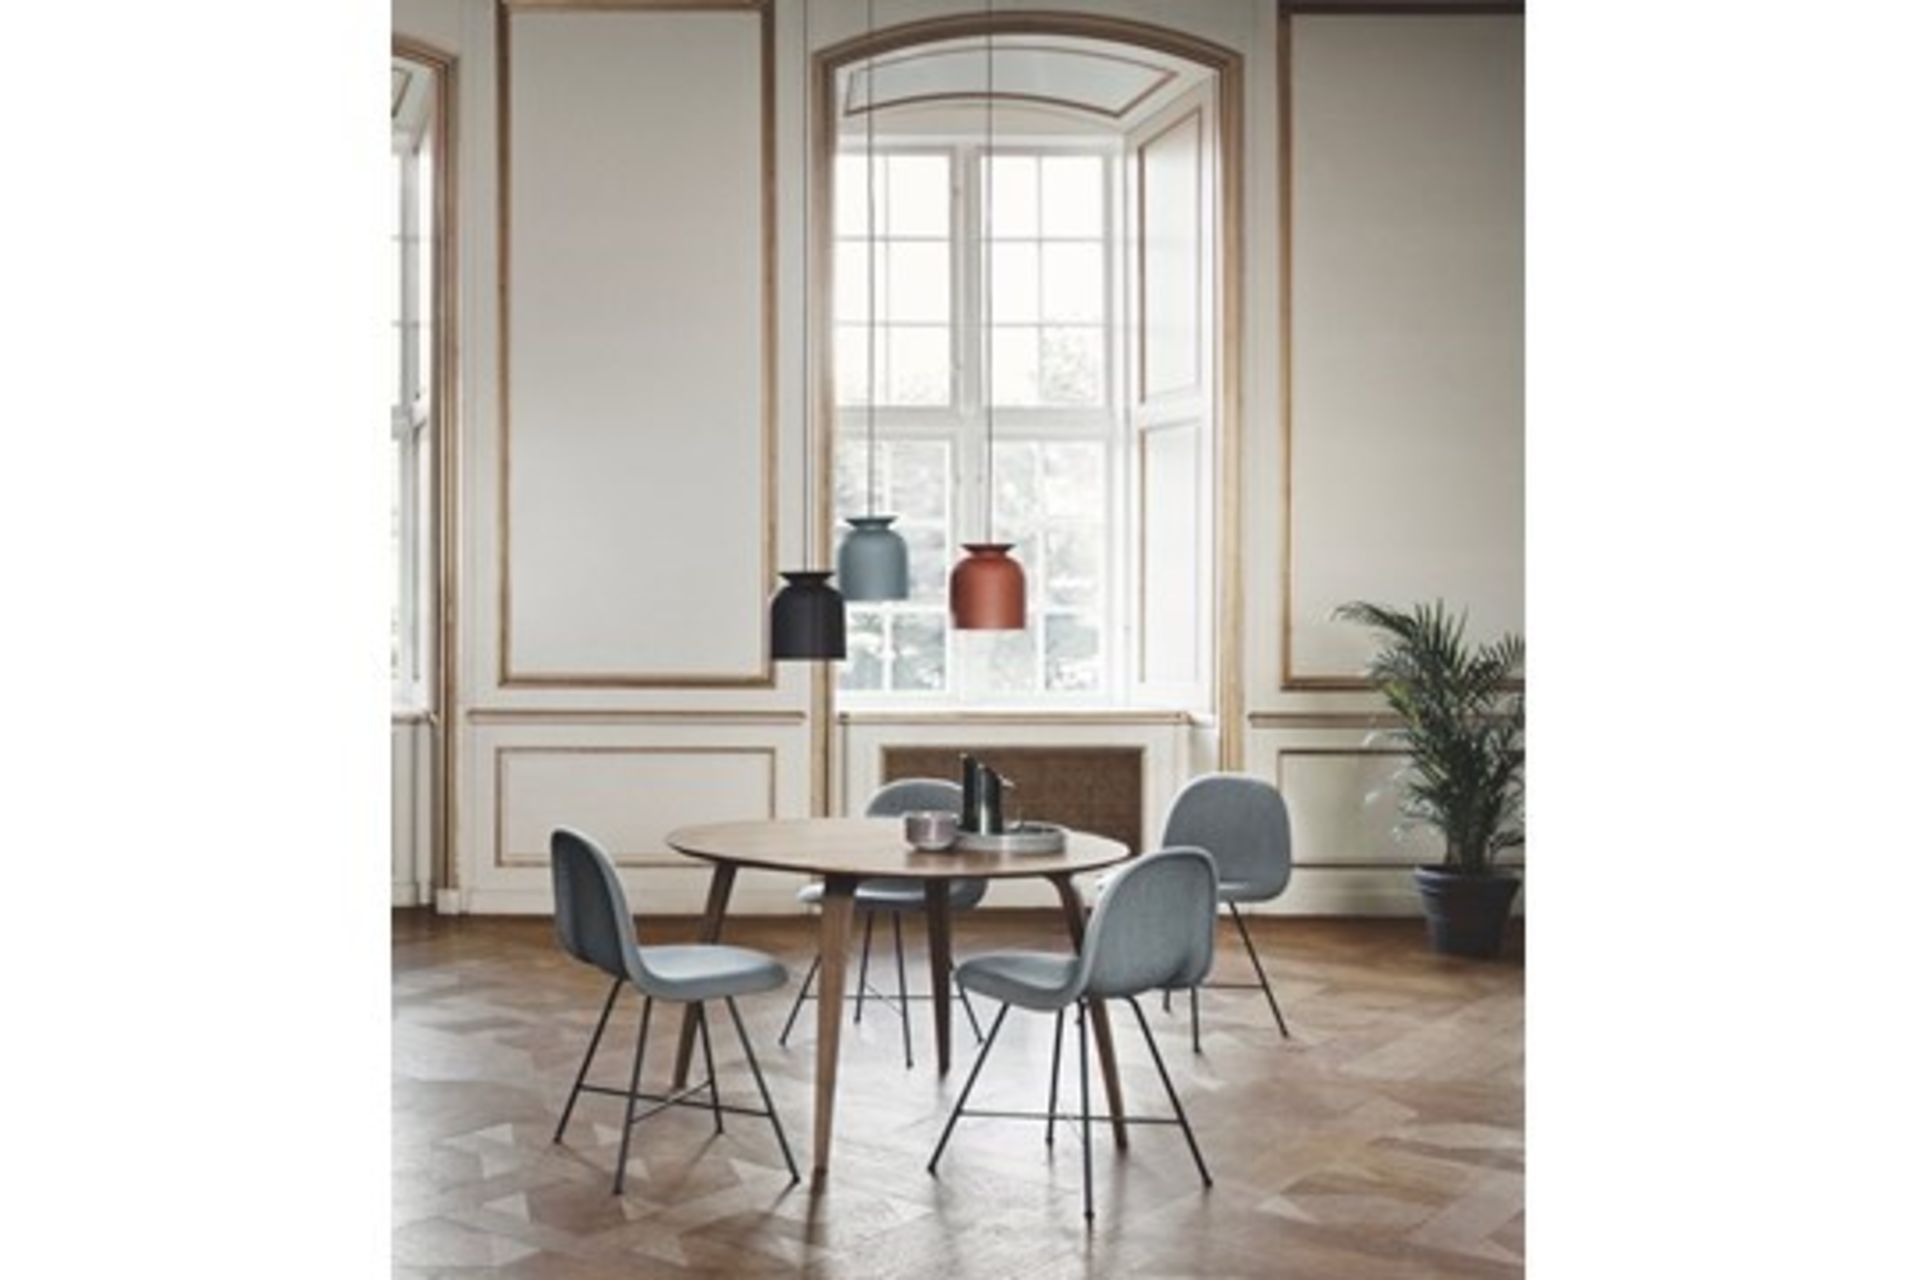 Gubi Round Dining Table Walnut 120cm Minimalist With An Organic Expression, The Gubi Round Dining - Image 2 of 2